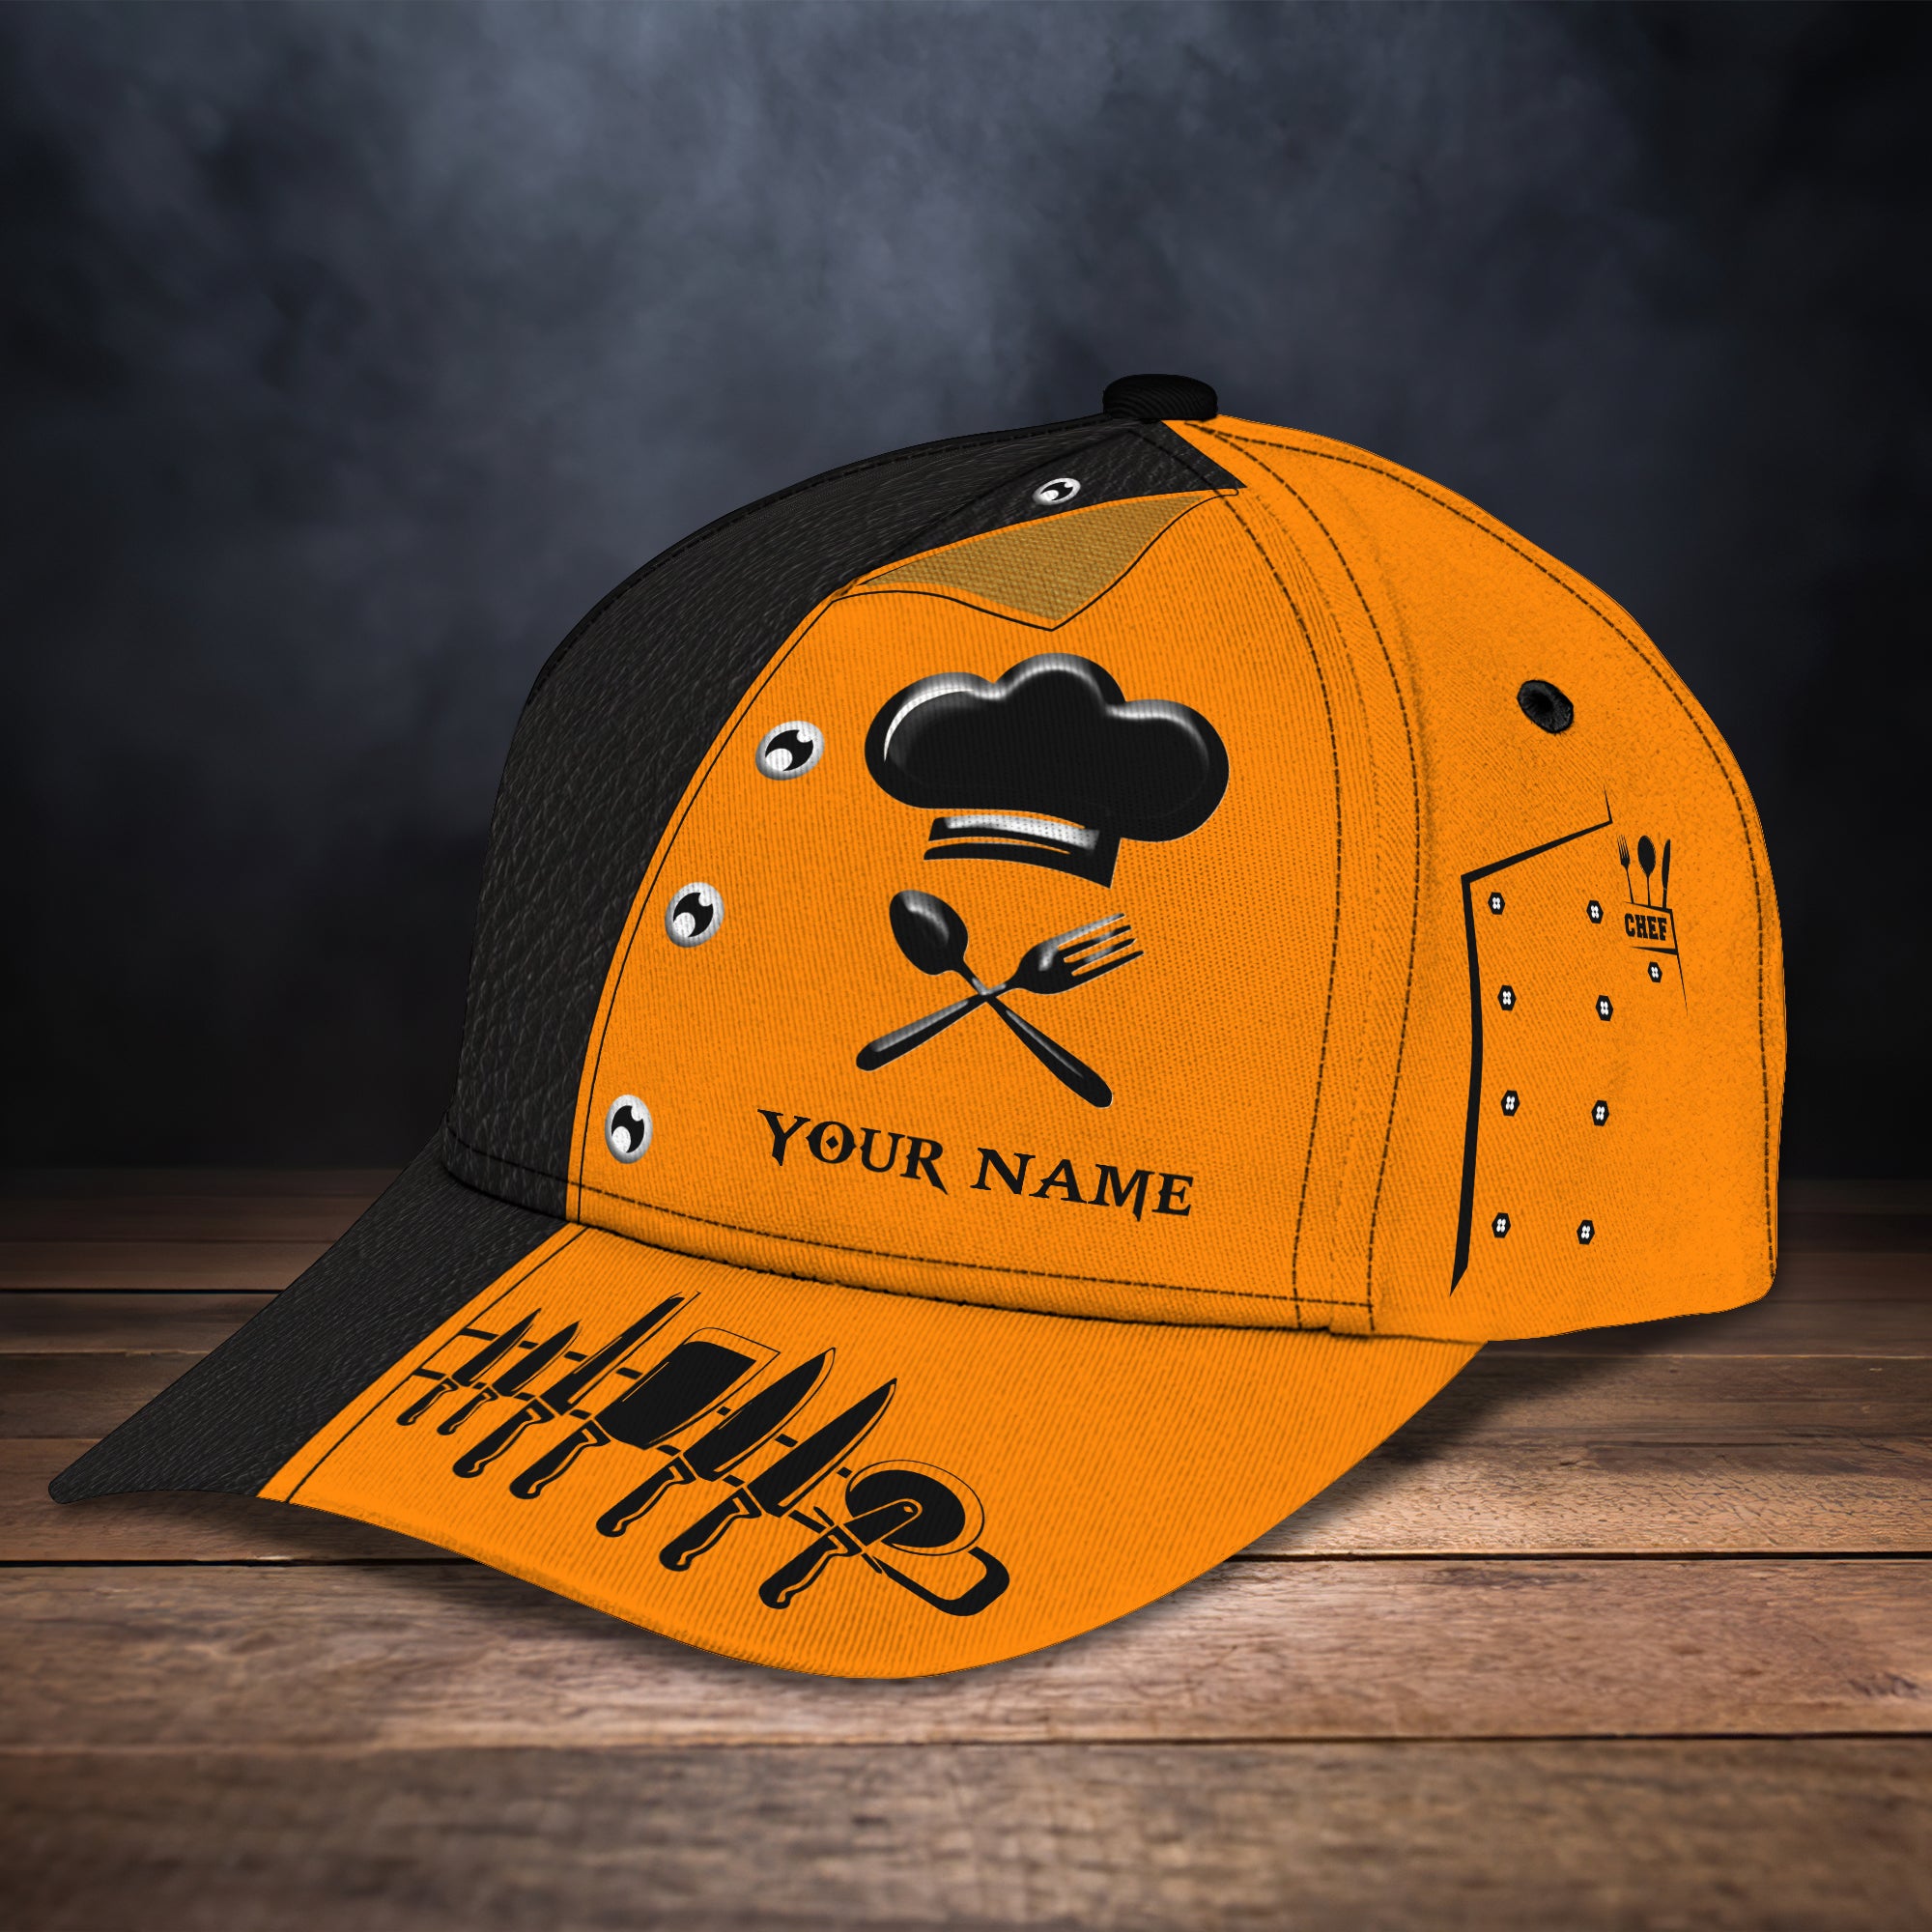 CV98 - Personalized Name Cap - Chef 04